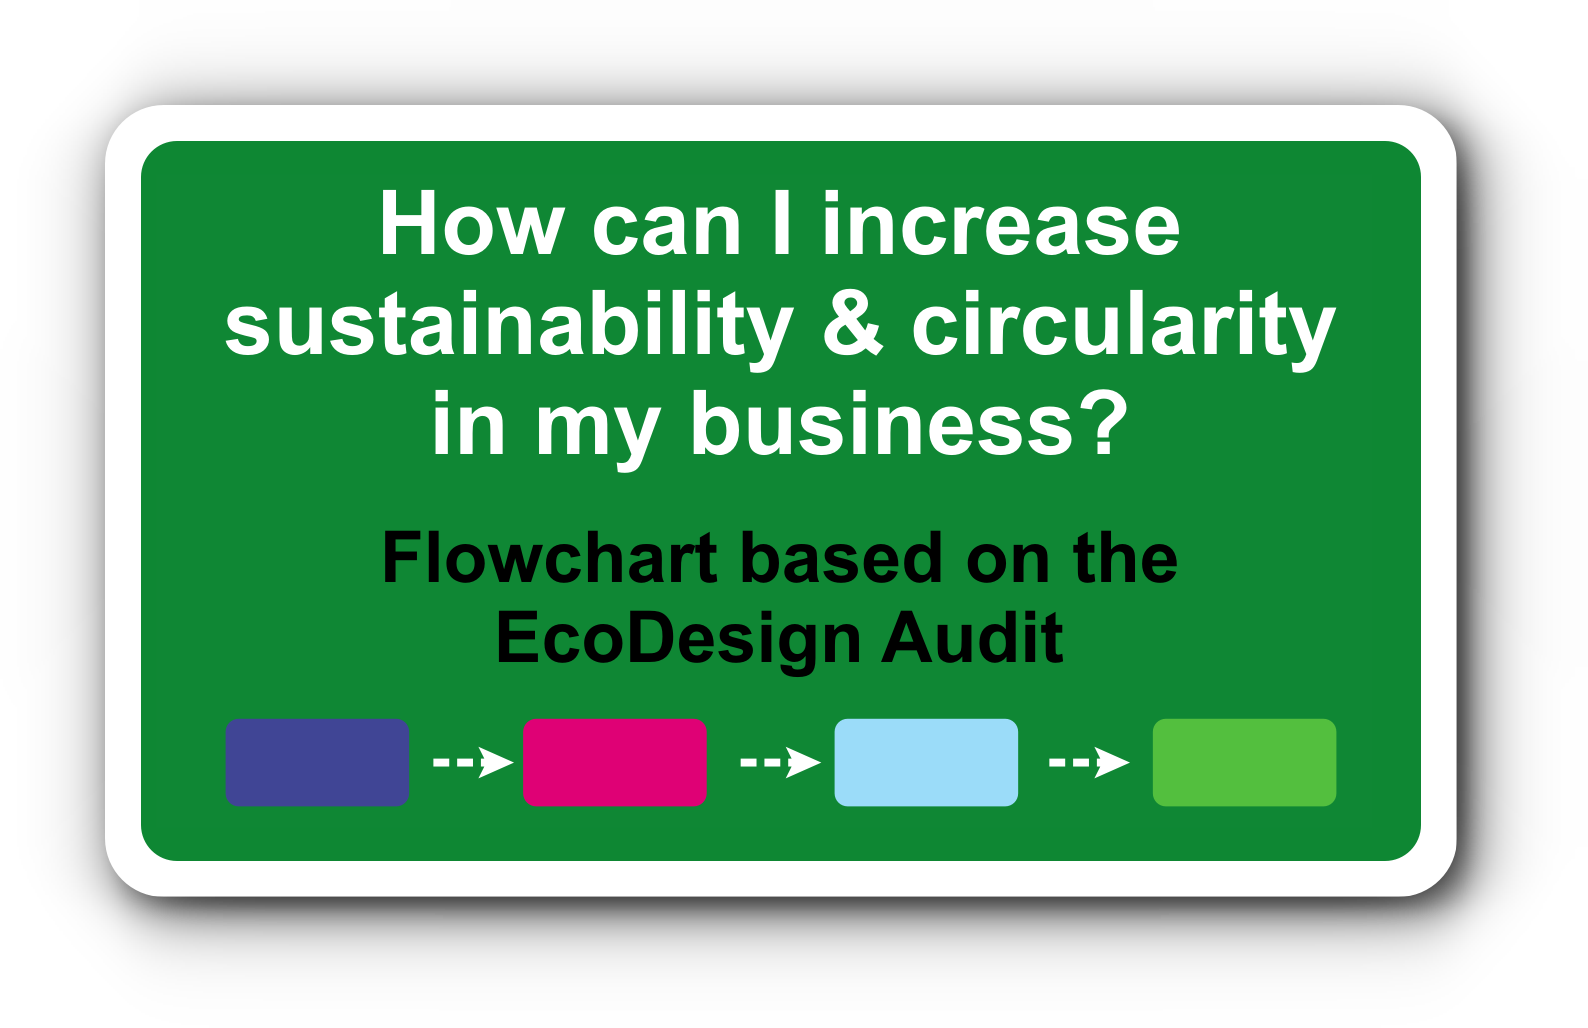 How can I increase sustainability & circularity in my business?